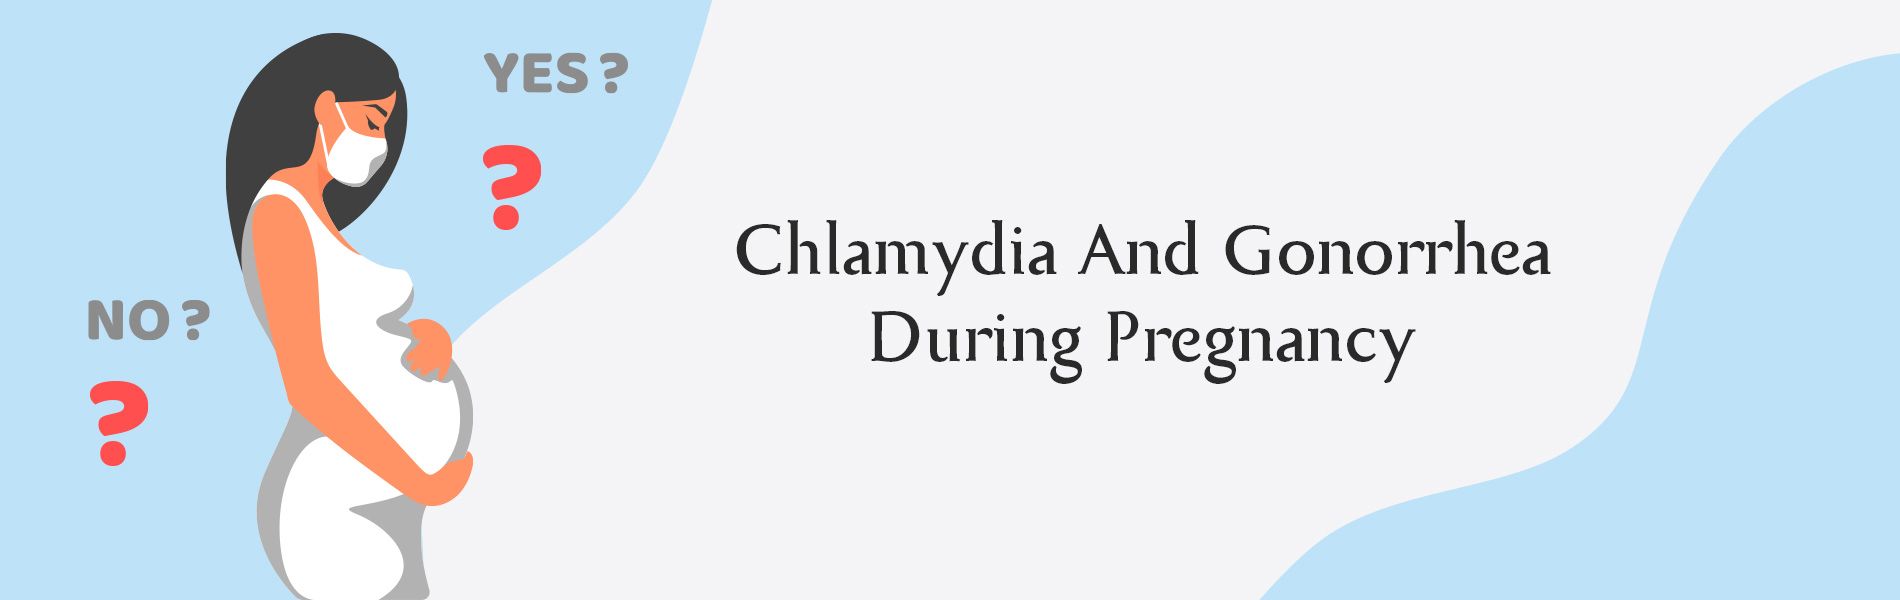 Chlamydia And Gonorrhea During Pregnancy 